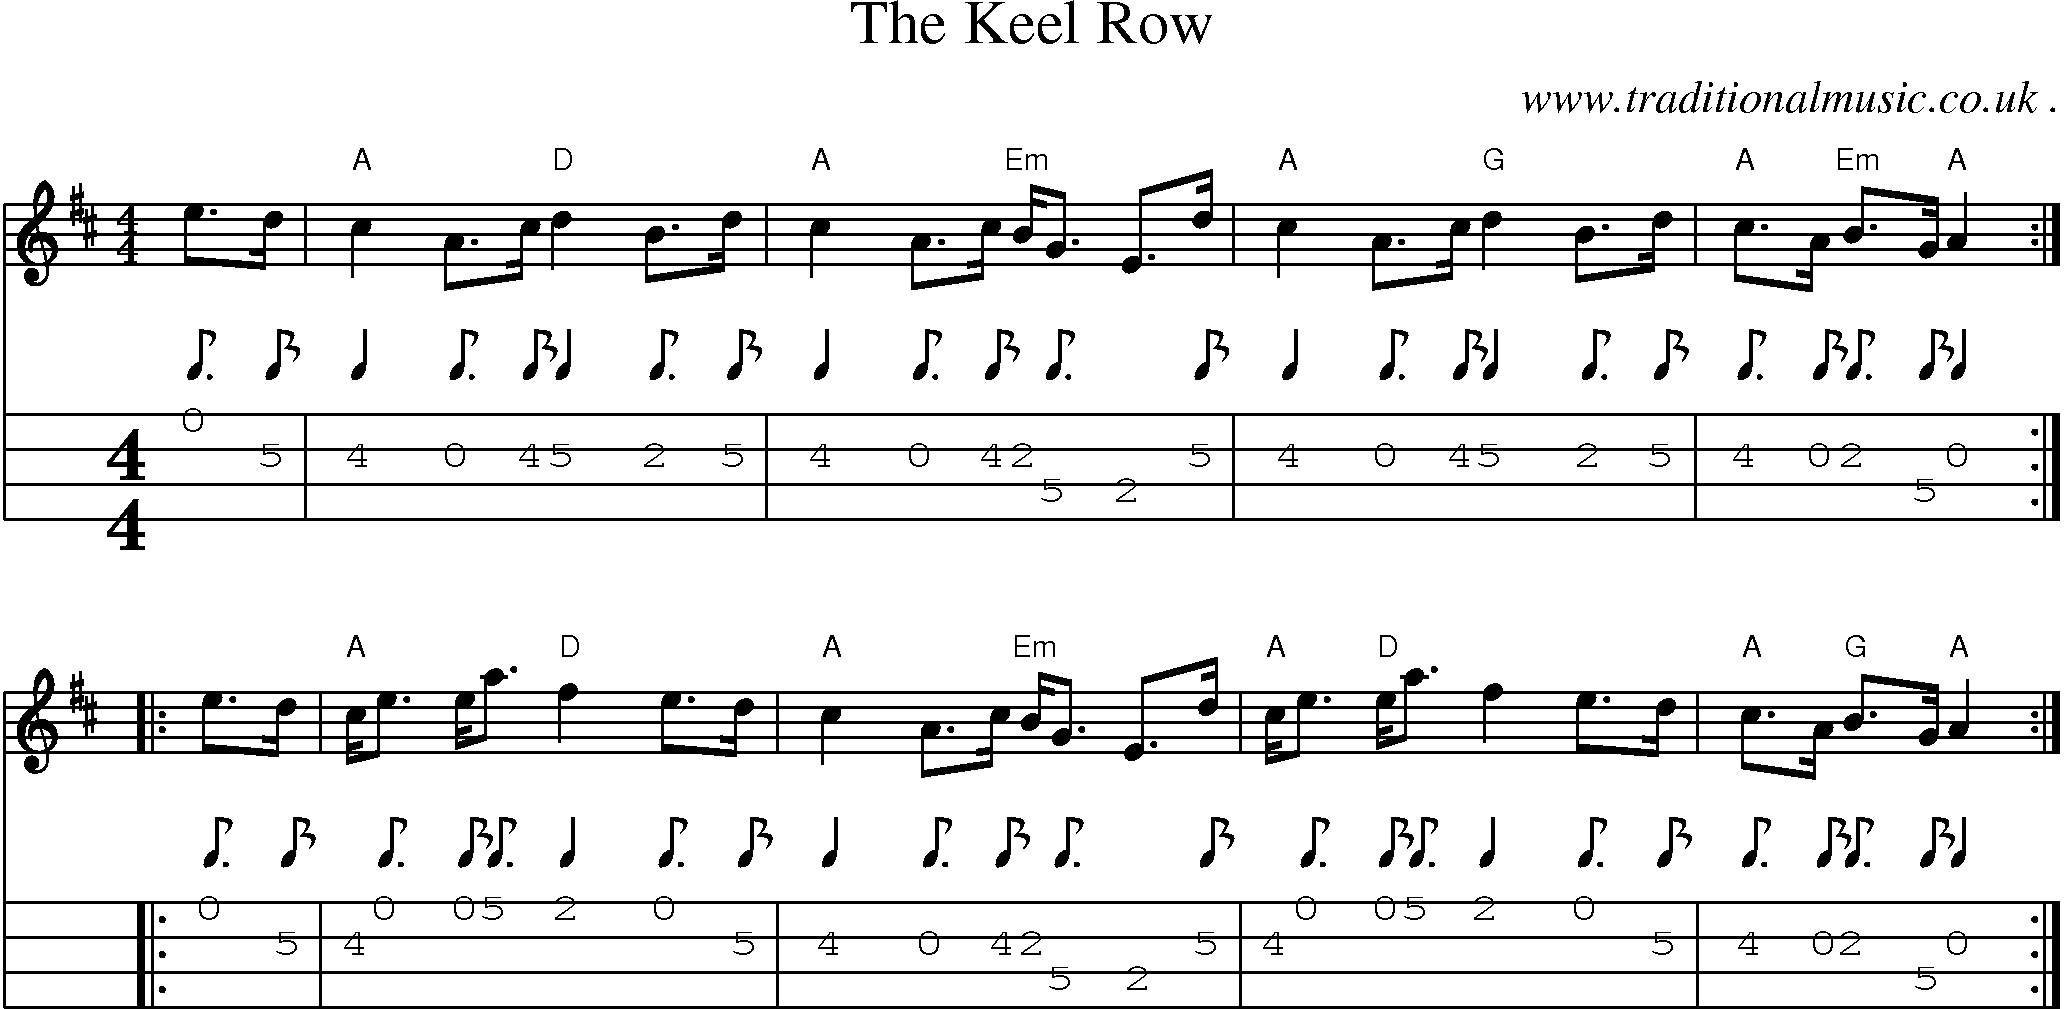 Music Score and Guitar Tabs for The Keel Row